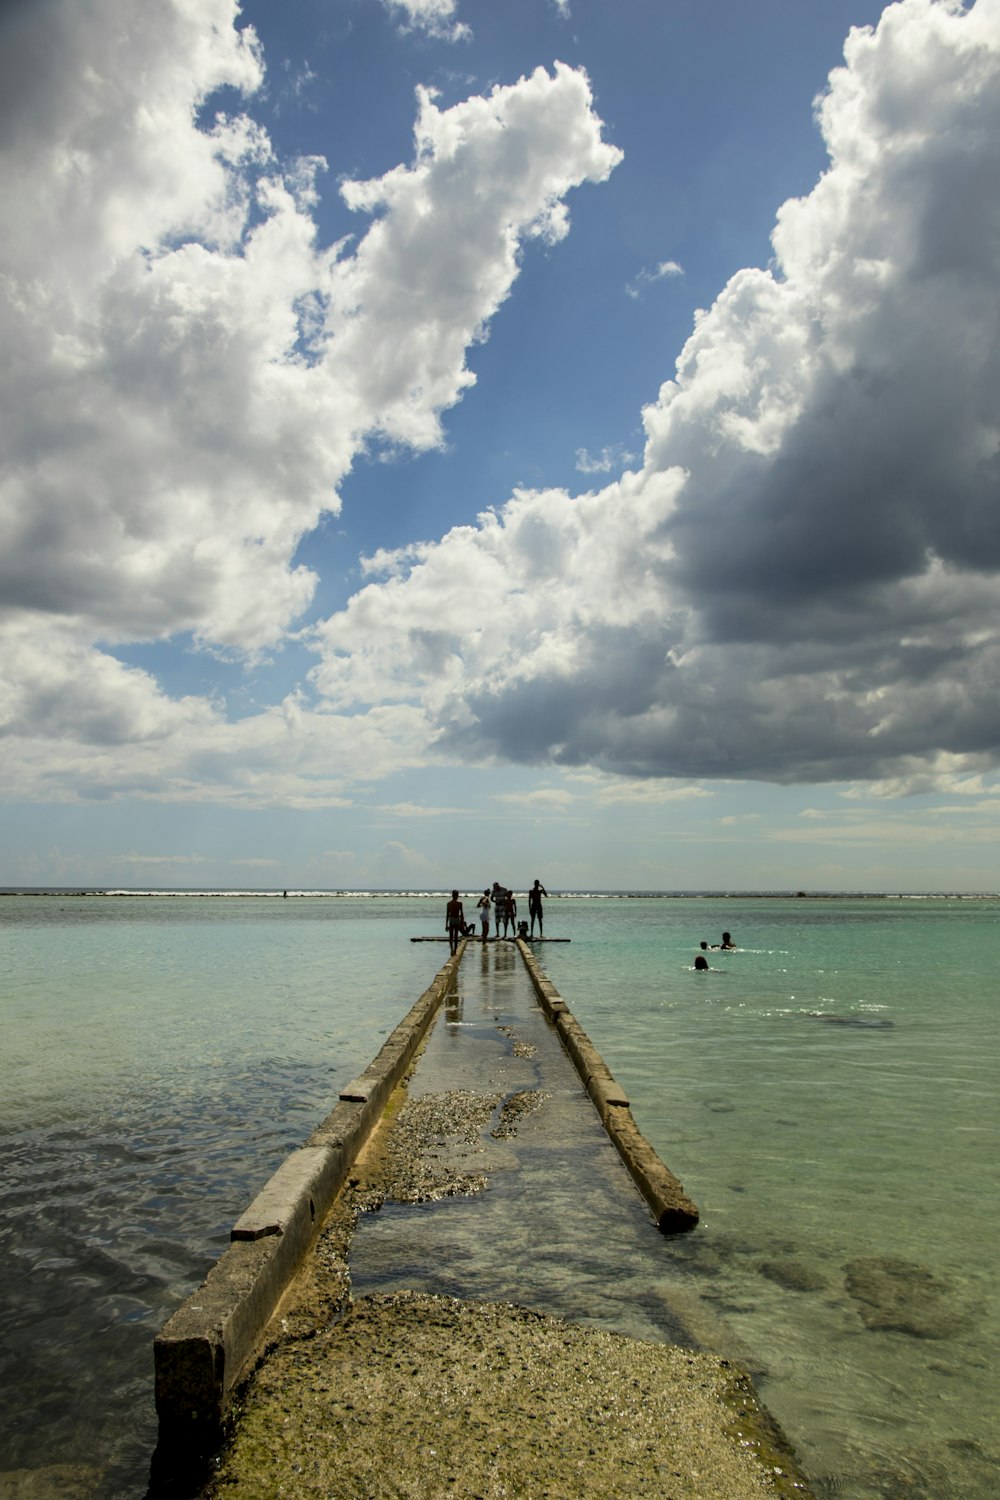 people walking on wooden dock under blue and white cloudy sky during daytime